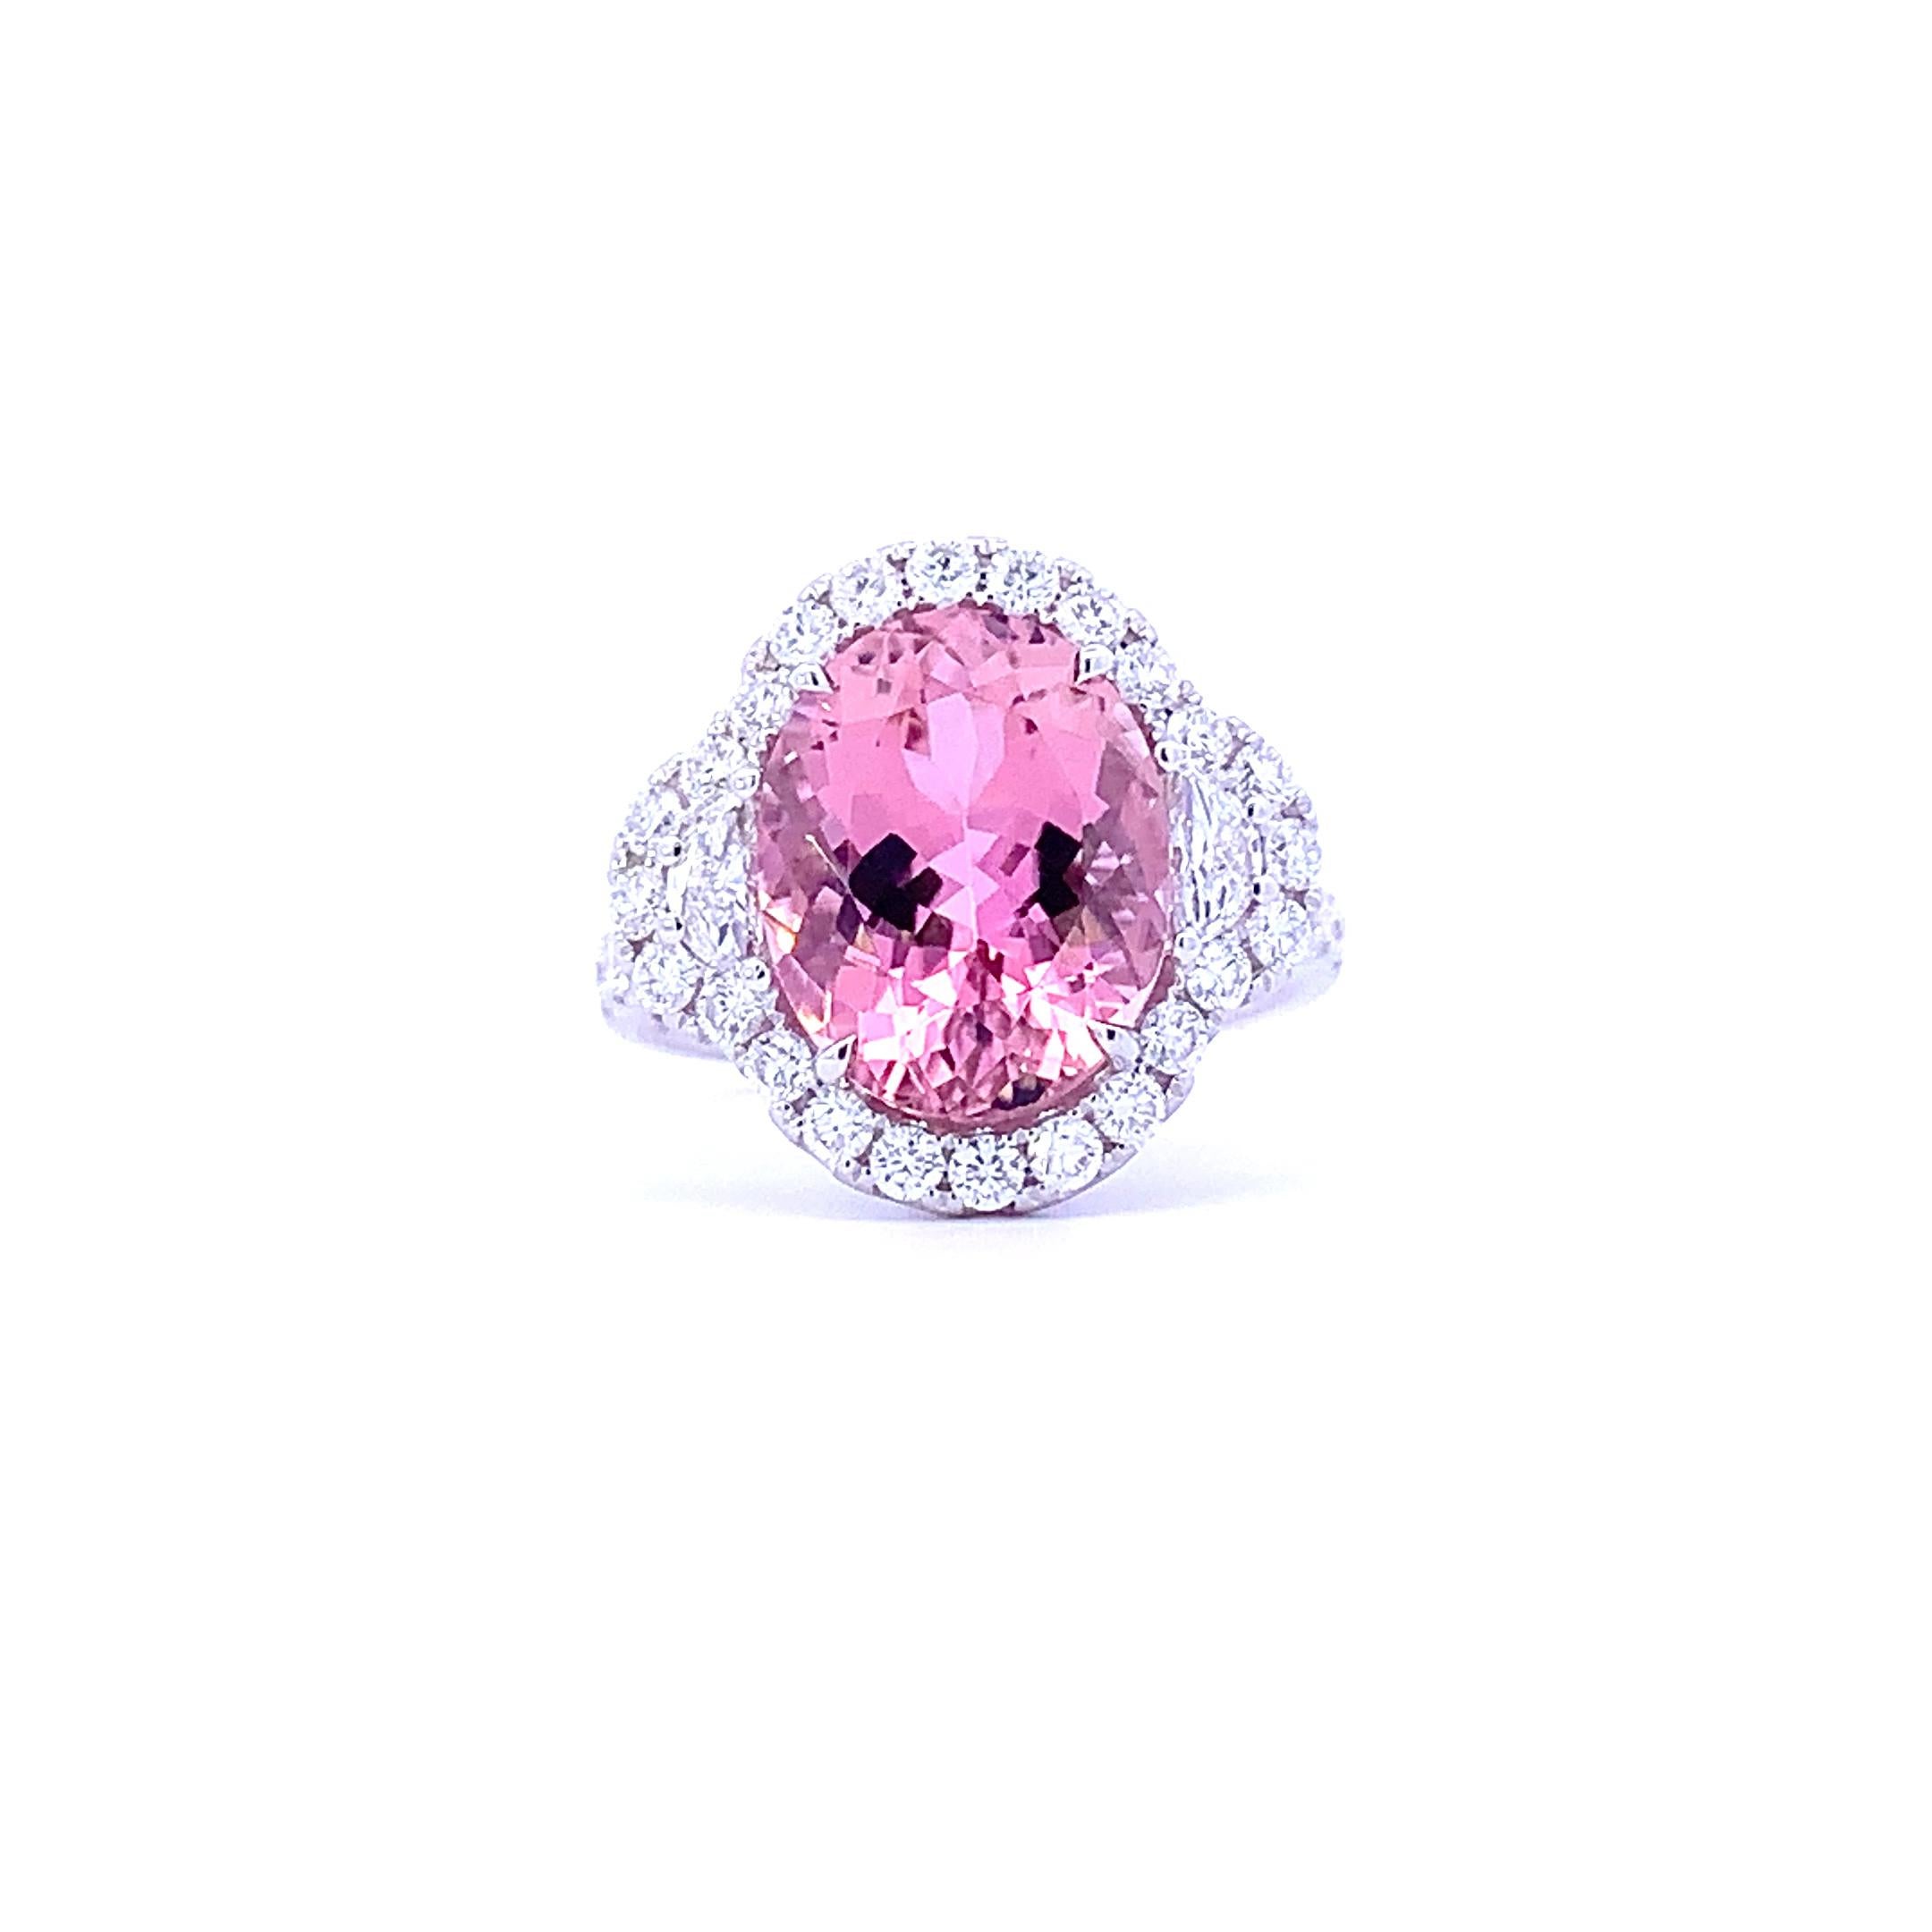 This Fancy Royal Pink Tourmaline Ring is a stunning piece of jewelry. Crafted in 18k white gold, it features a 6.04 carat oval pink tourmaline as the centerpiece, surrounded by 1.16 carats of diamonds and two half moon diamonds. The perfect choice